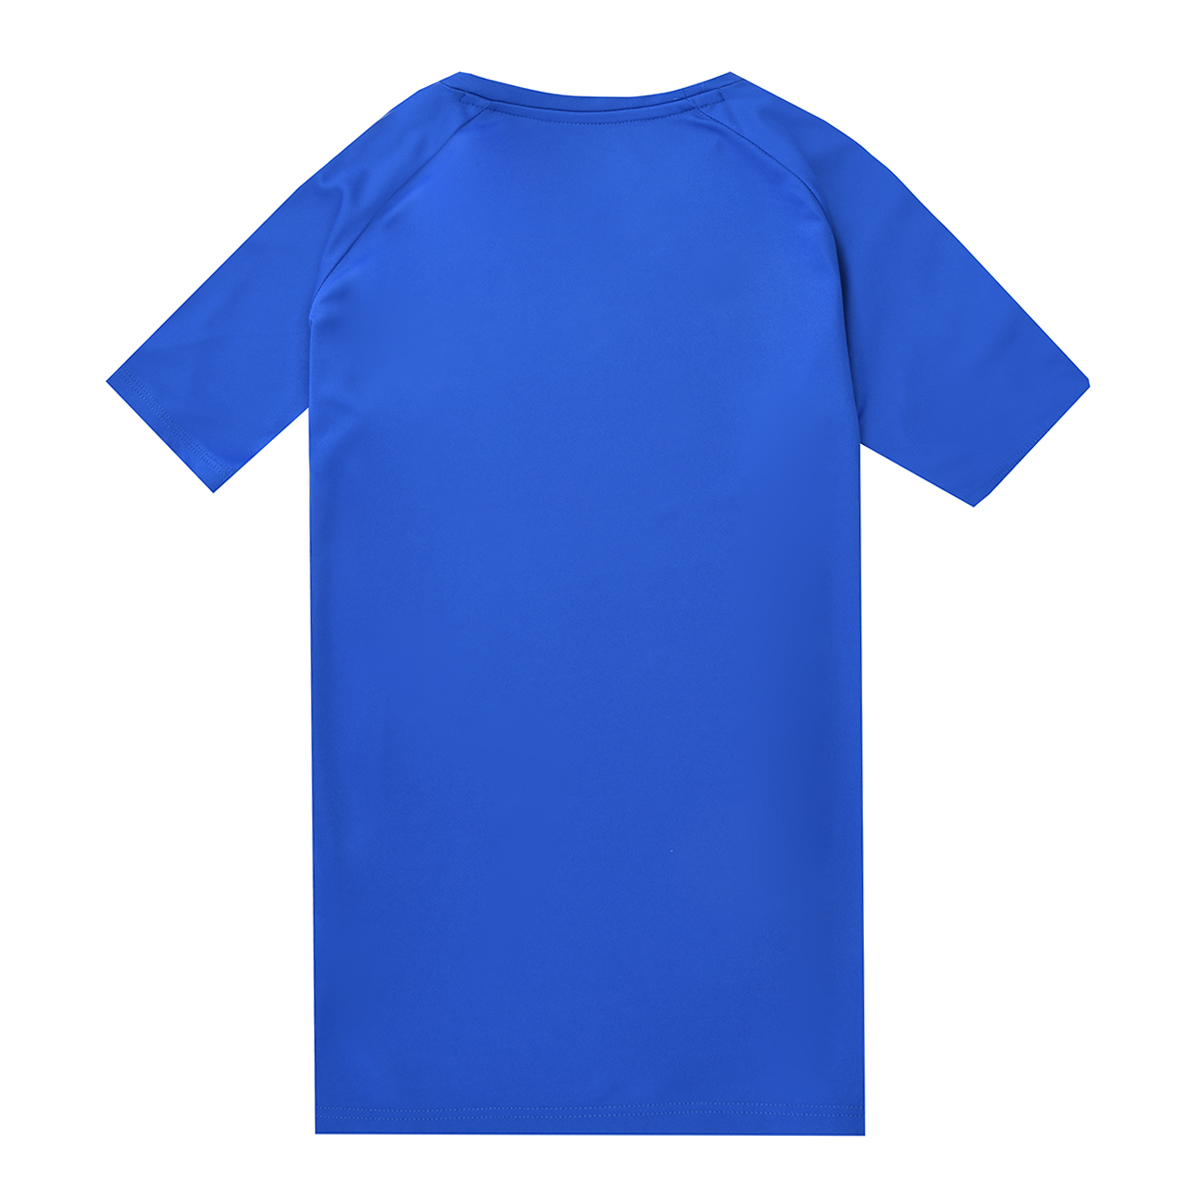 Camiseta Umbro Traditional Tapel,  image number null